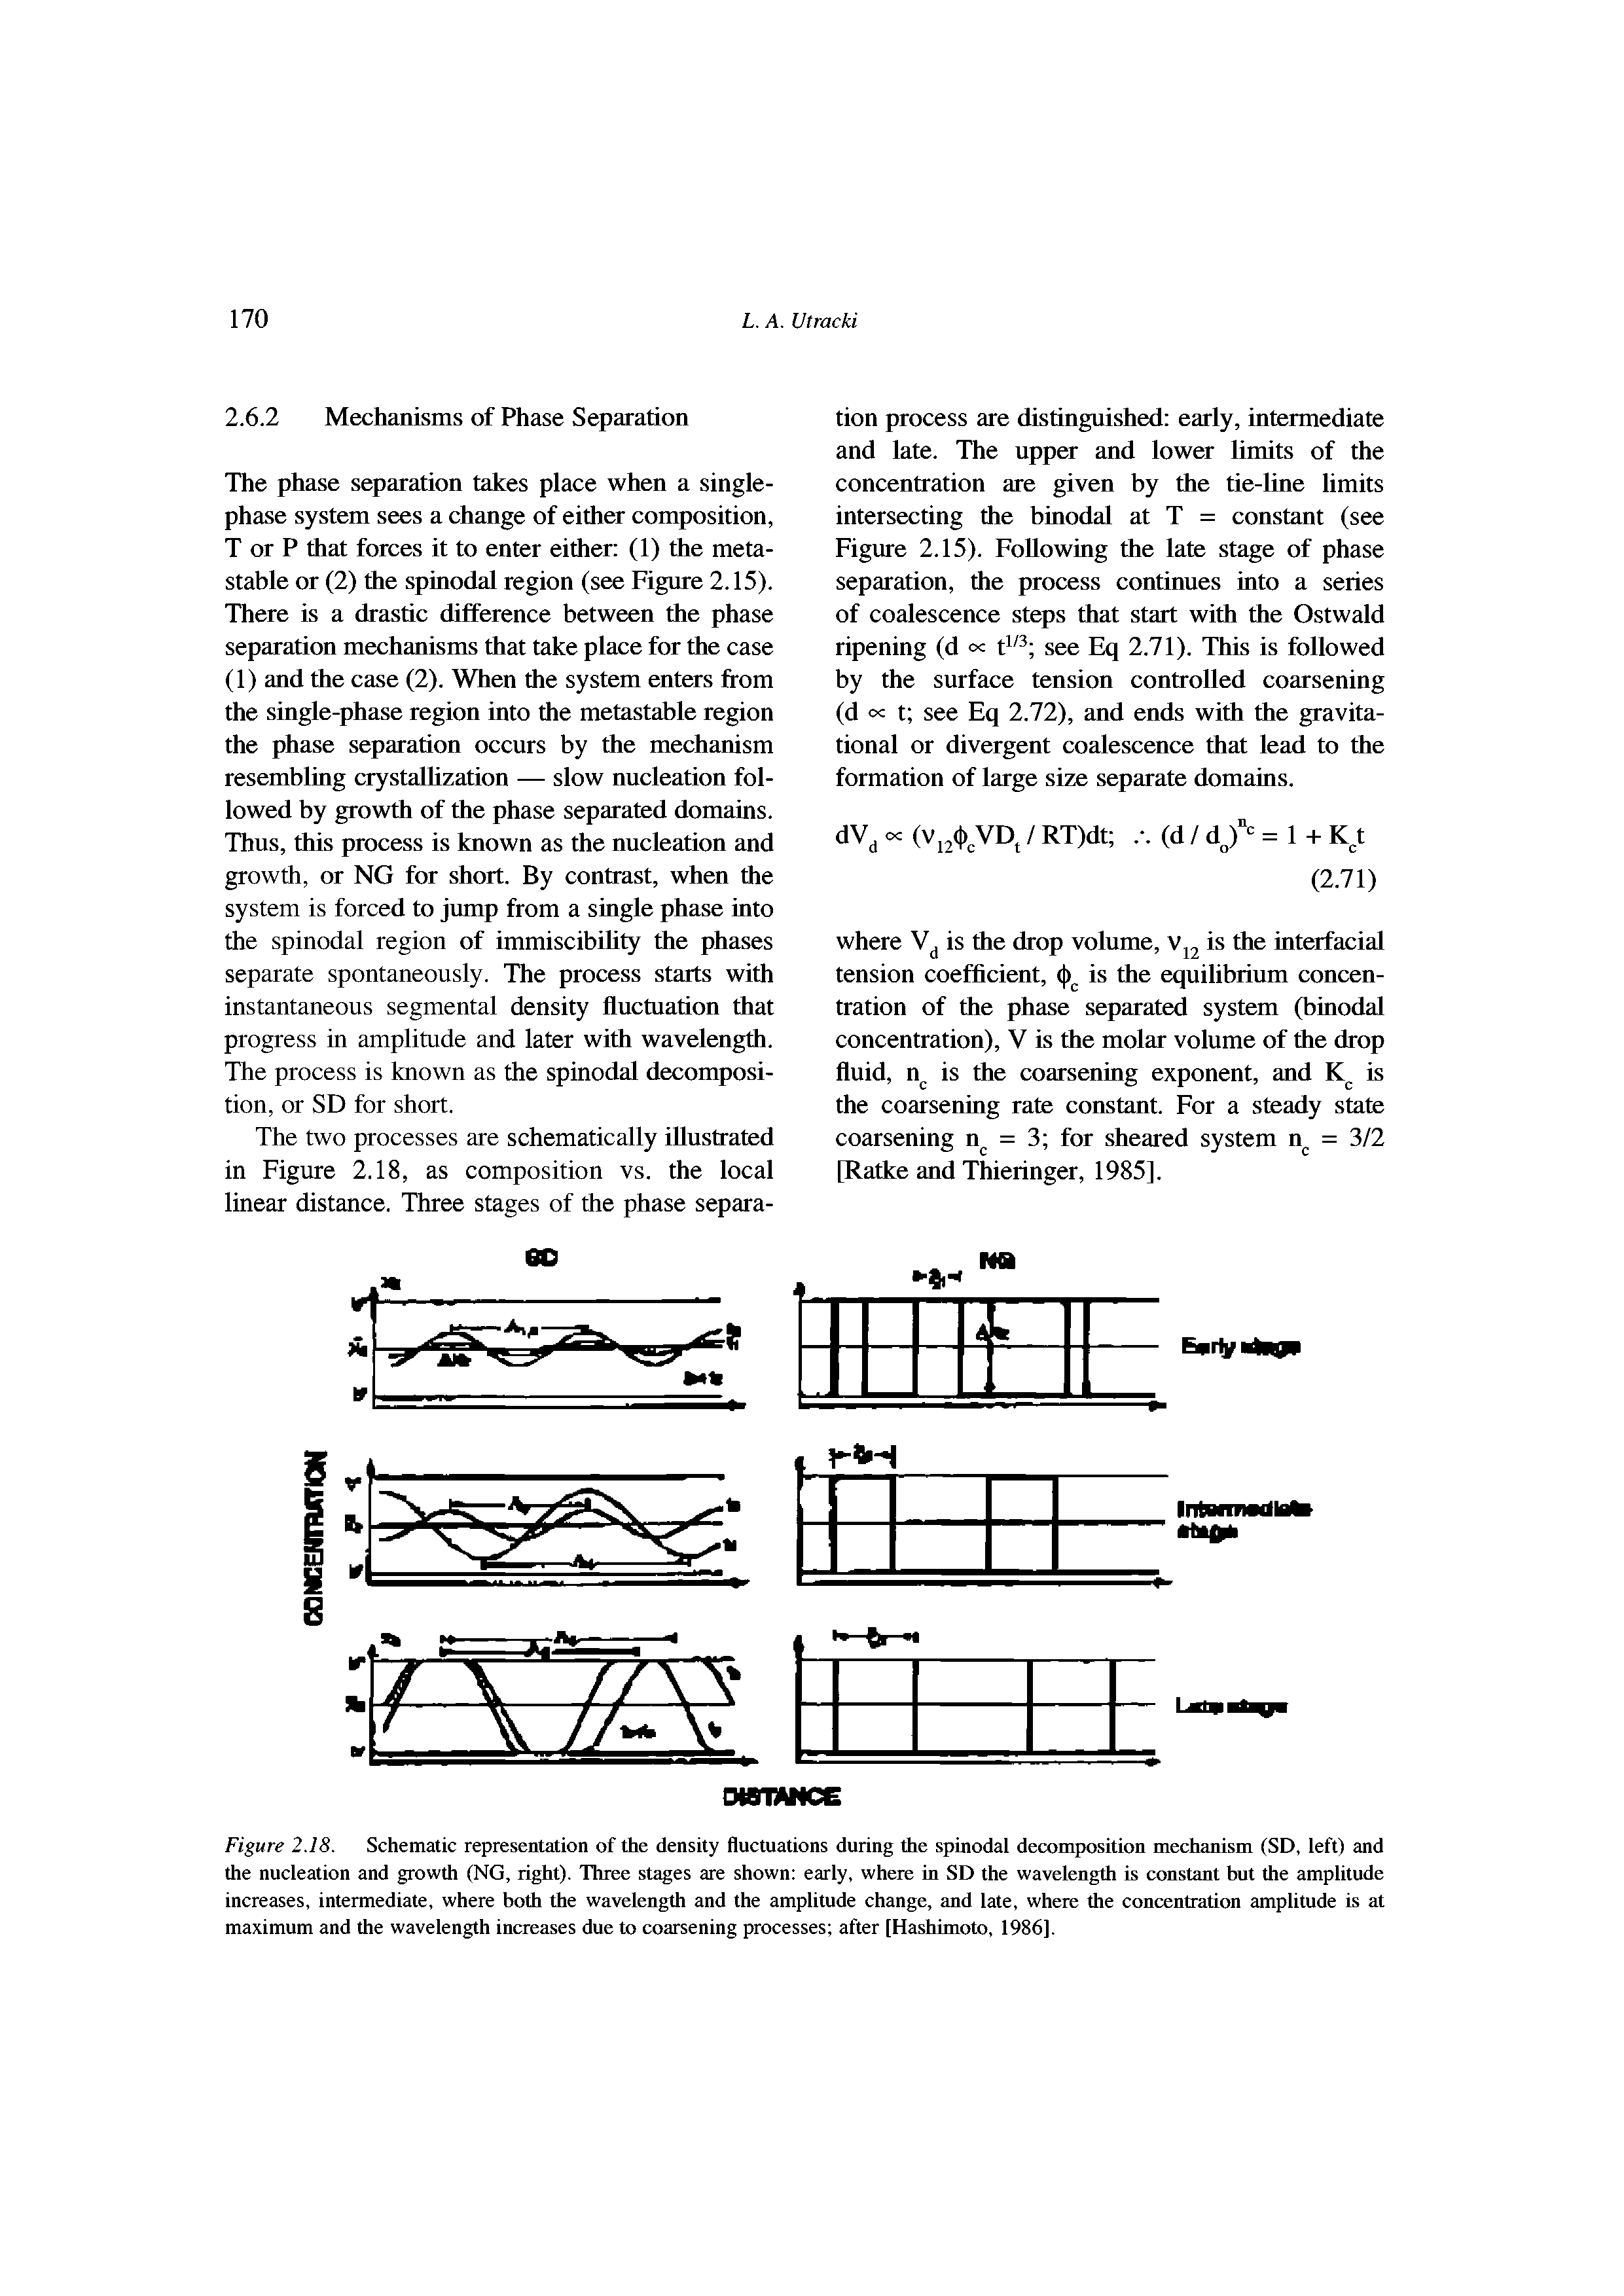 Figure 2.18. Schematic representation of the density fluctuations during the spinodal decomposition mechanism (SD, left) and the nucleation and growth (NG, right). Three stages are shown early, where in SD the wavelength is constant but the amplitude increases, intermediate, where both the wavelength and the amplitude change, and late, where the concentration amplitude is at maximum and the wavelength increases due to coarsening processes after [Hashimoto, 1986],...